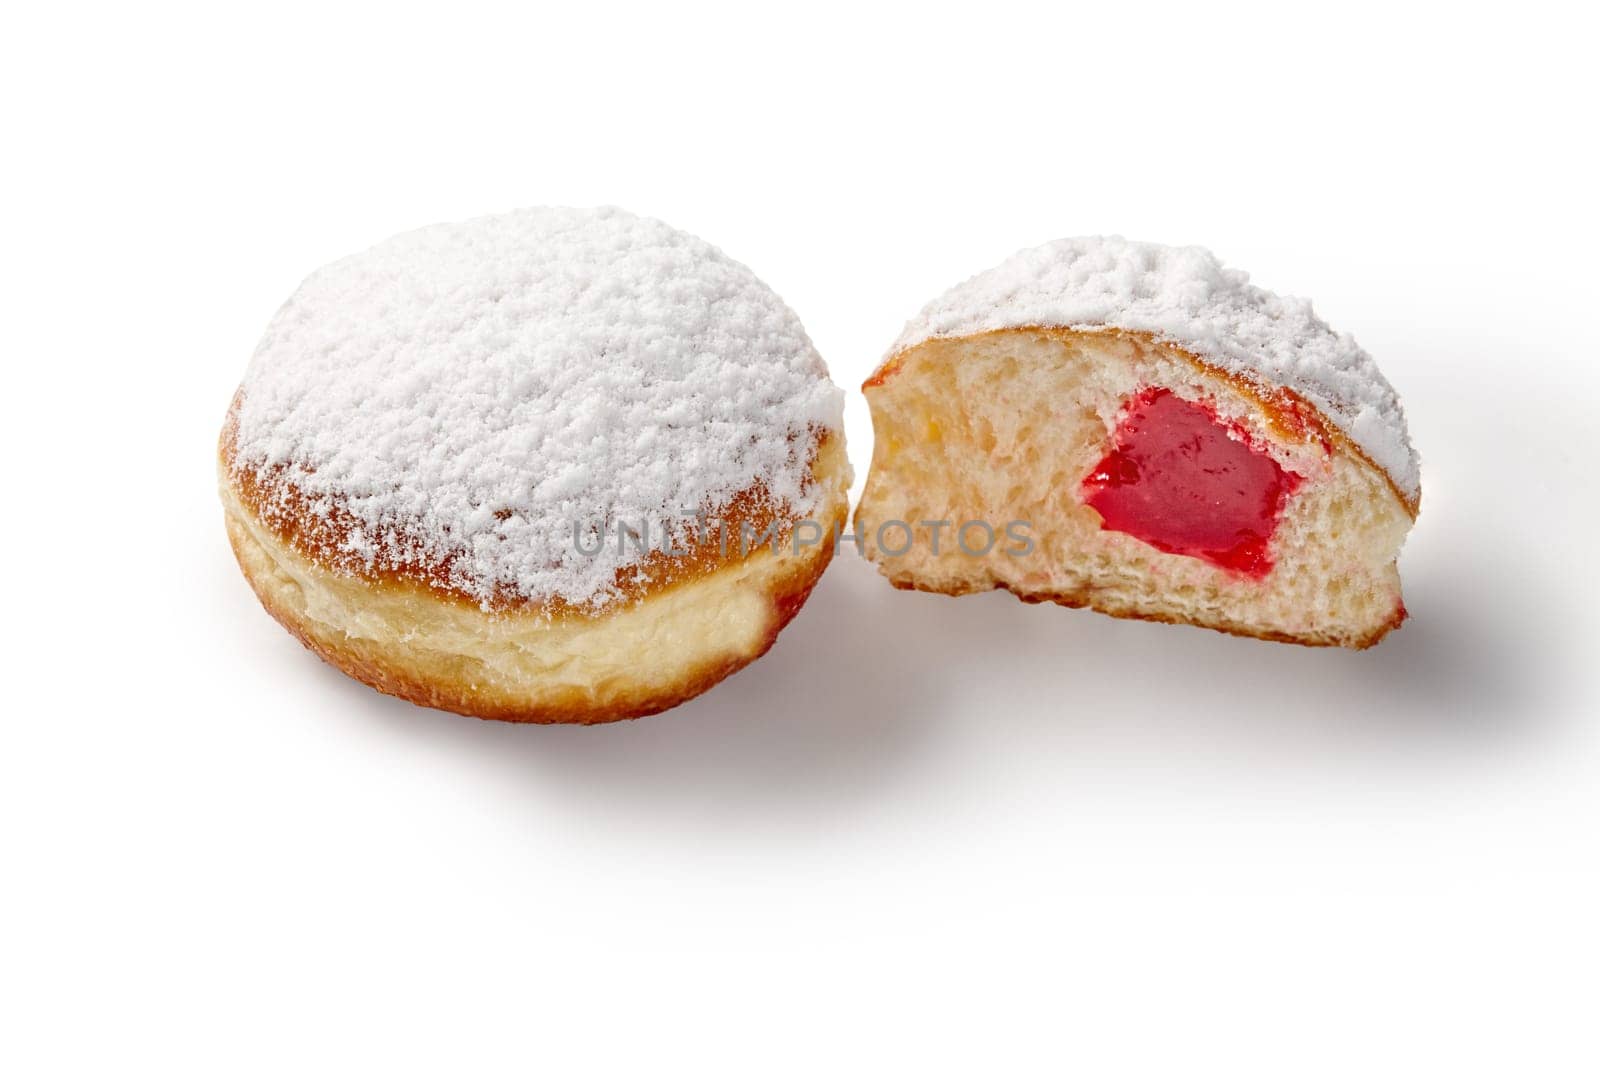 Doughnuts with strawberry filling topped with powdered sugar by nazarovsergey